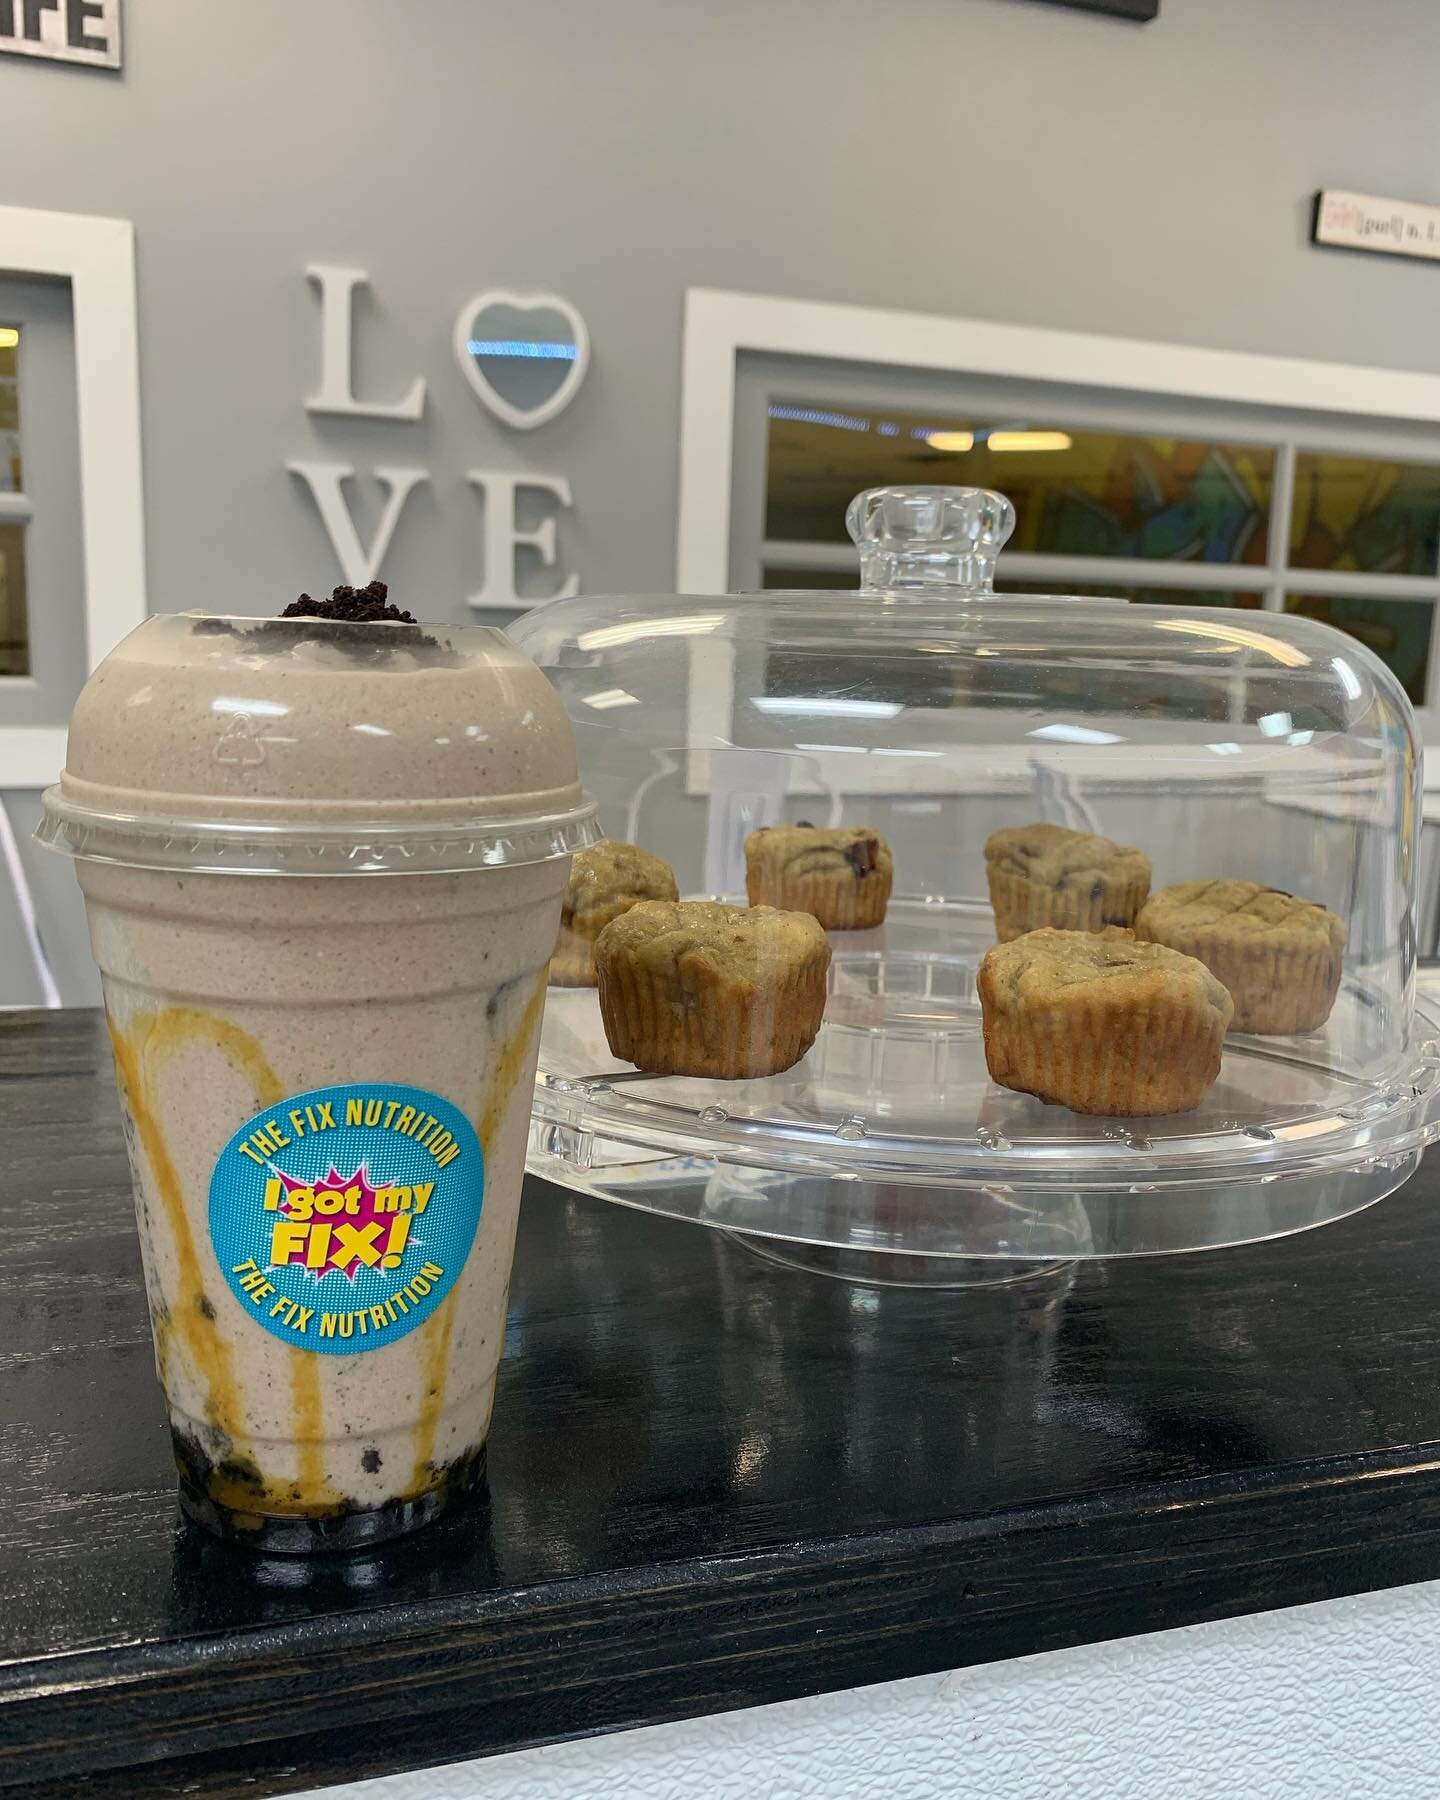 Good morning!!! TGIF!!! Come get your protein banana nut muffin and Oreo cold brew! What a great combo for breakfast! Low calorie! Low carb! Low sugar! Who says eating healthy can&rsquo;t be YUMMY??? 

Here 7am - 6pm today!
☎️ 734-693-2368 call/text 